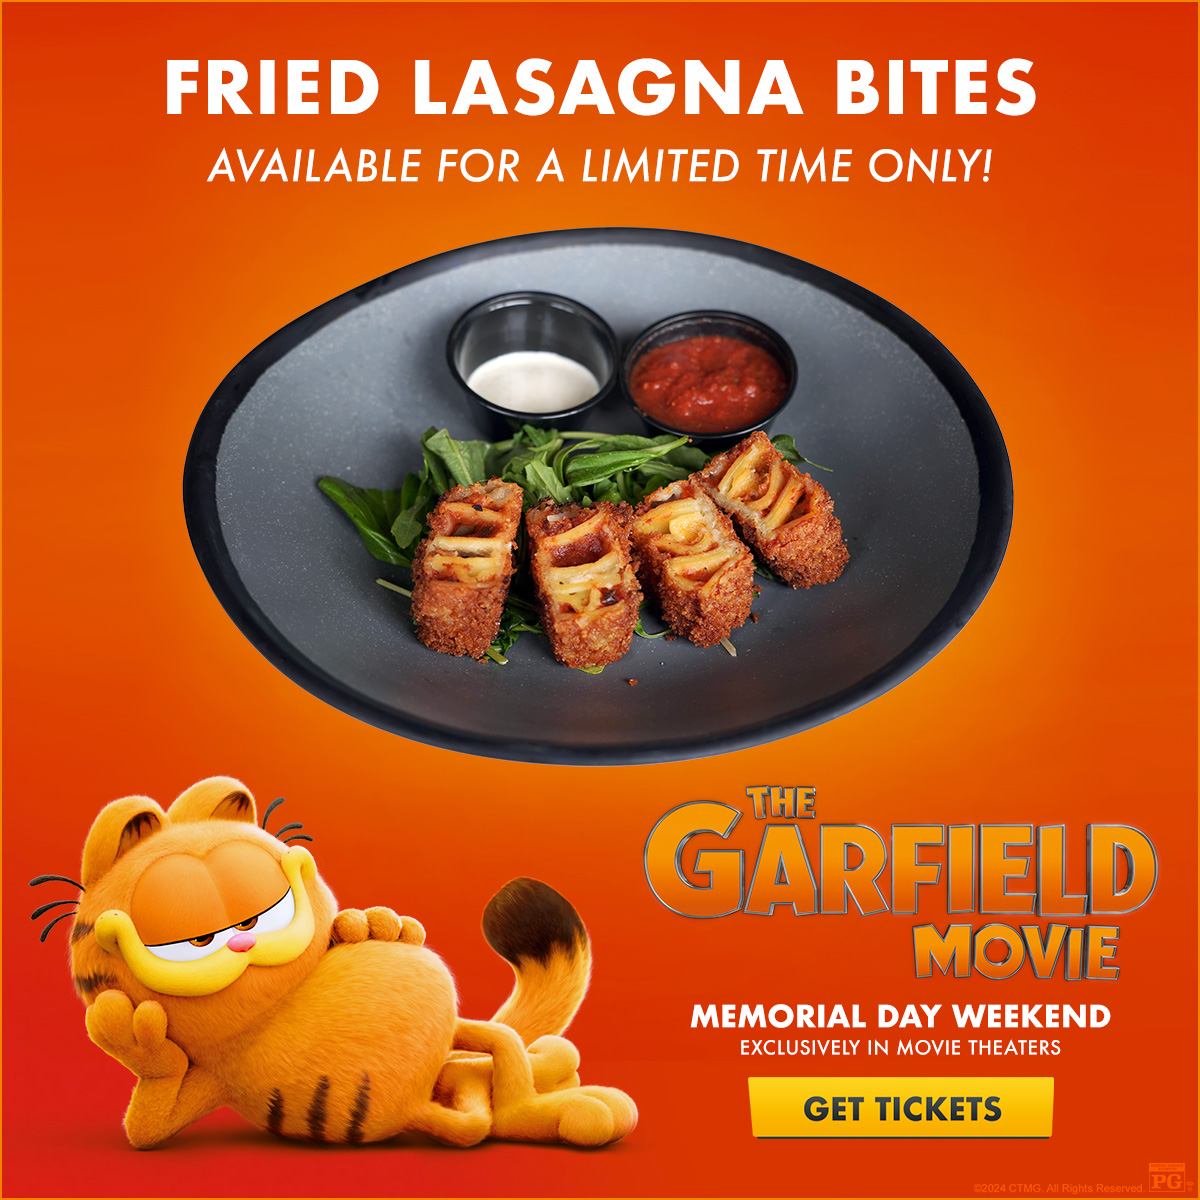 What plans could be more important than seeing Garfield on the big screen? 🐾 Be the FIRST to see #TheGarfieldMovie at our early access screening! You can also snag our Fried Lasagna Bites for a limited time only starting May 19th - June 2nd. 🎟️: brnw.ch/21wJK4p